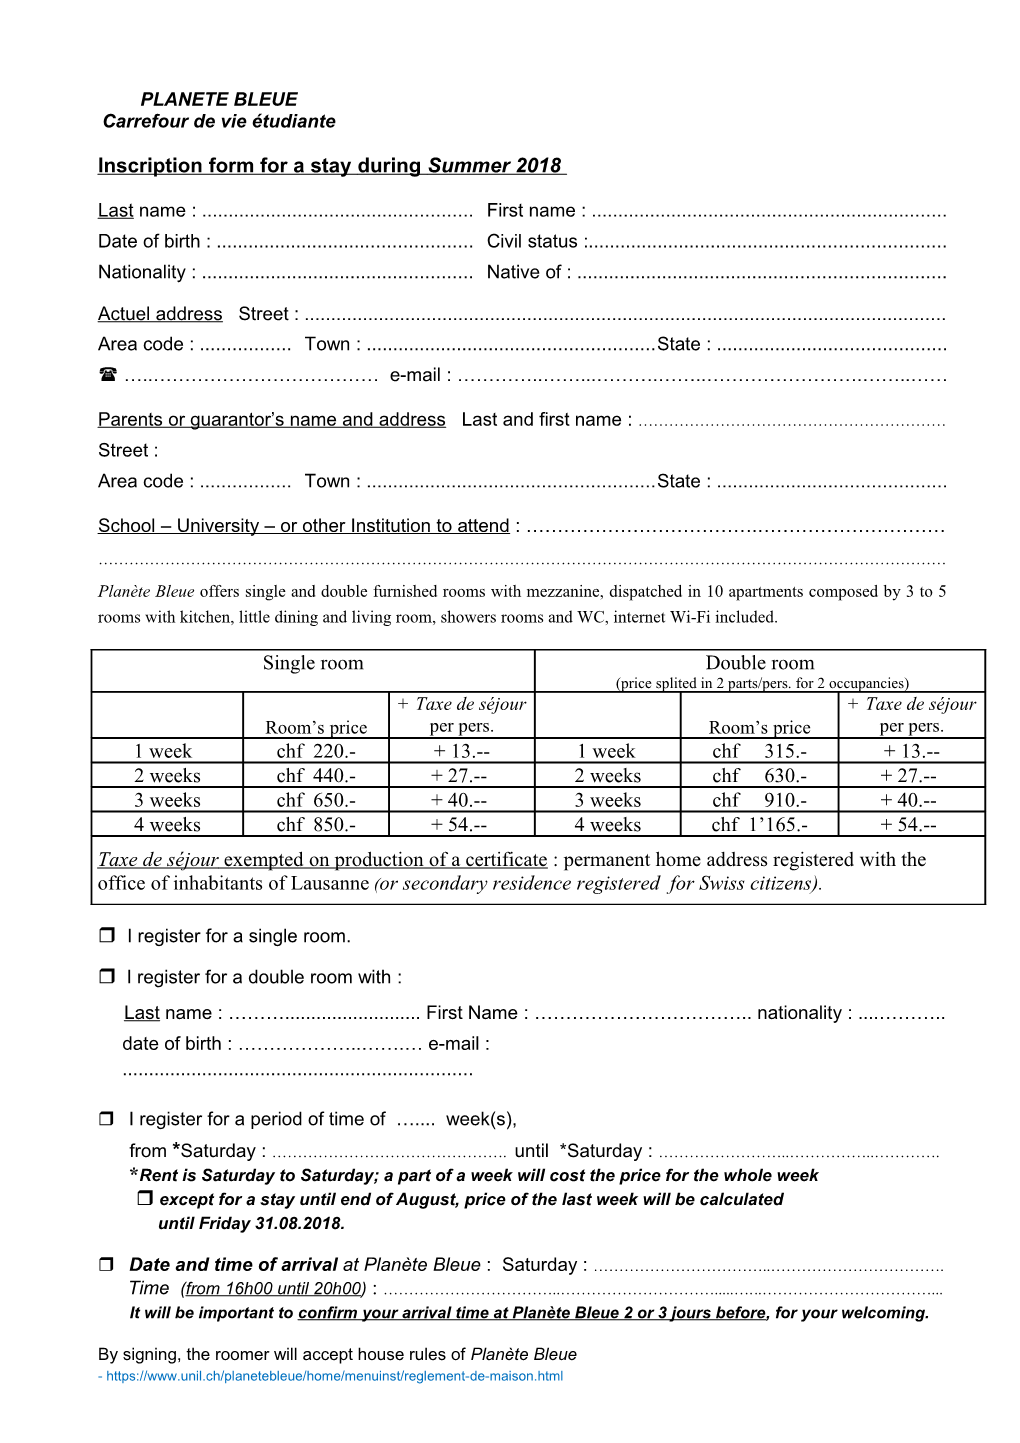 Inscription Form for a Stay During Summer 2018